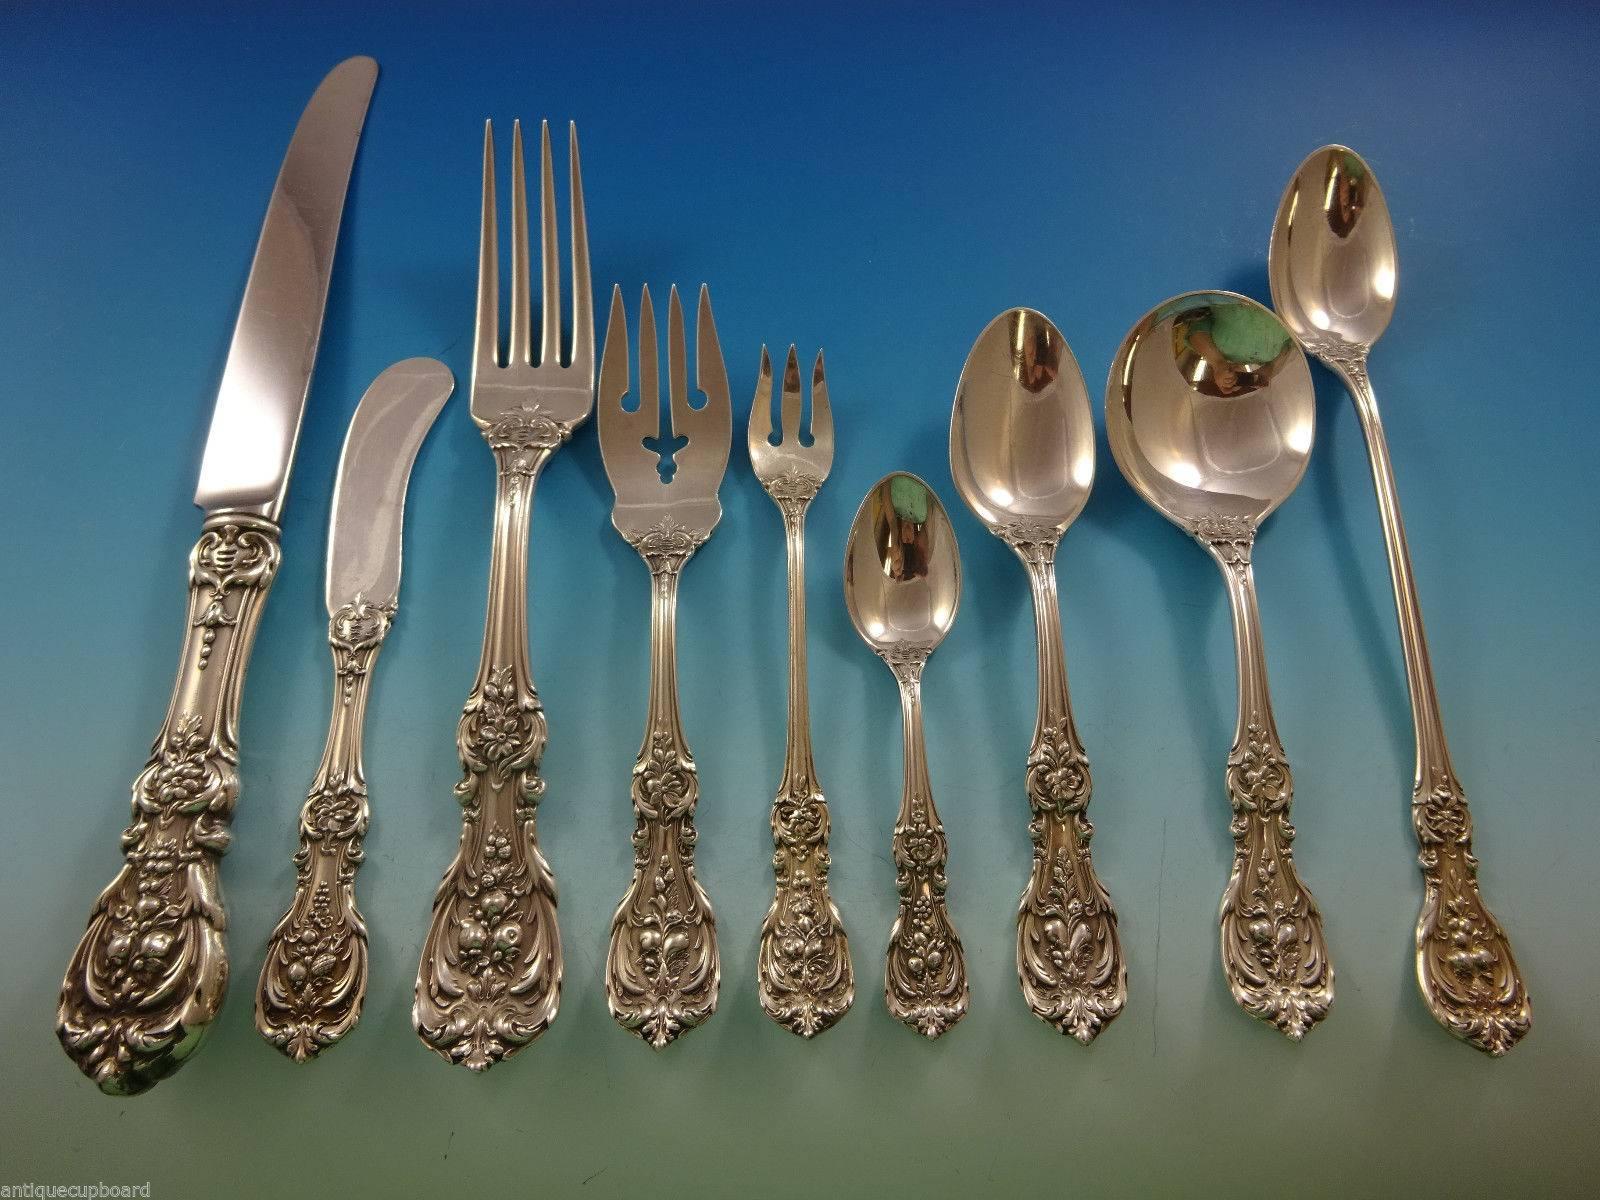 Often called America's most glorious sterling silver flatware pattern, Francis I is a true work of art. Each piece's central decoration represents a different cluster of fruit and flowers, giving your table a unique and classic presentation. This is